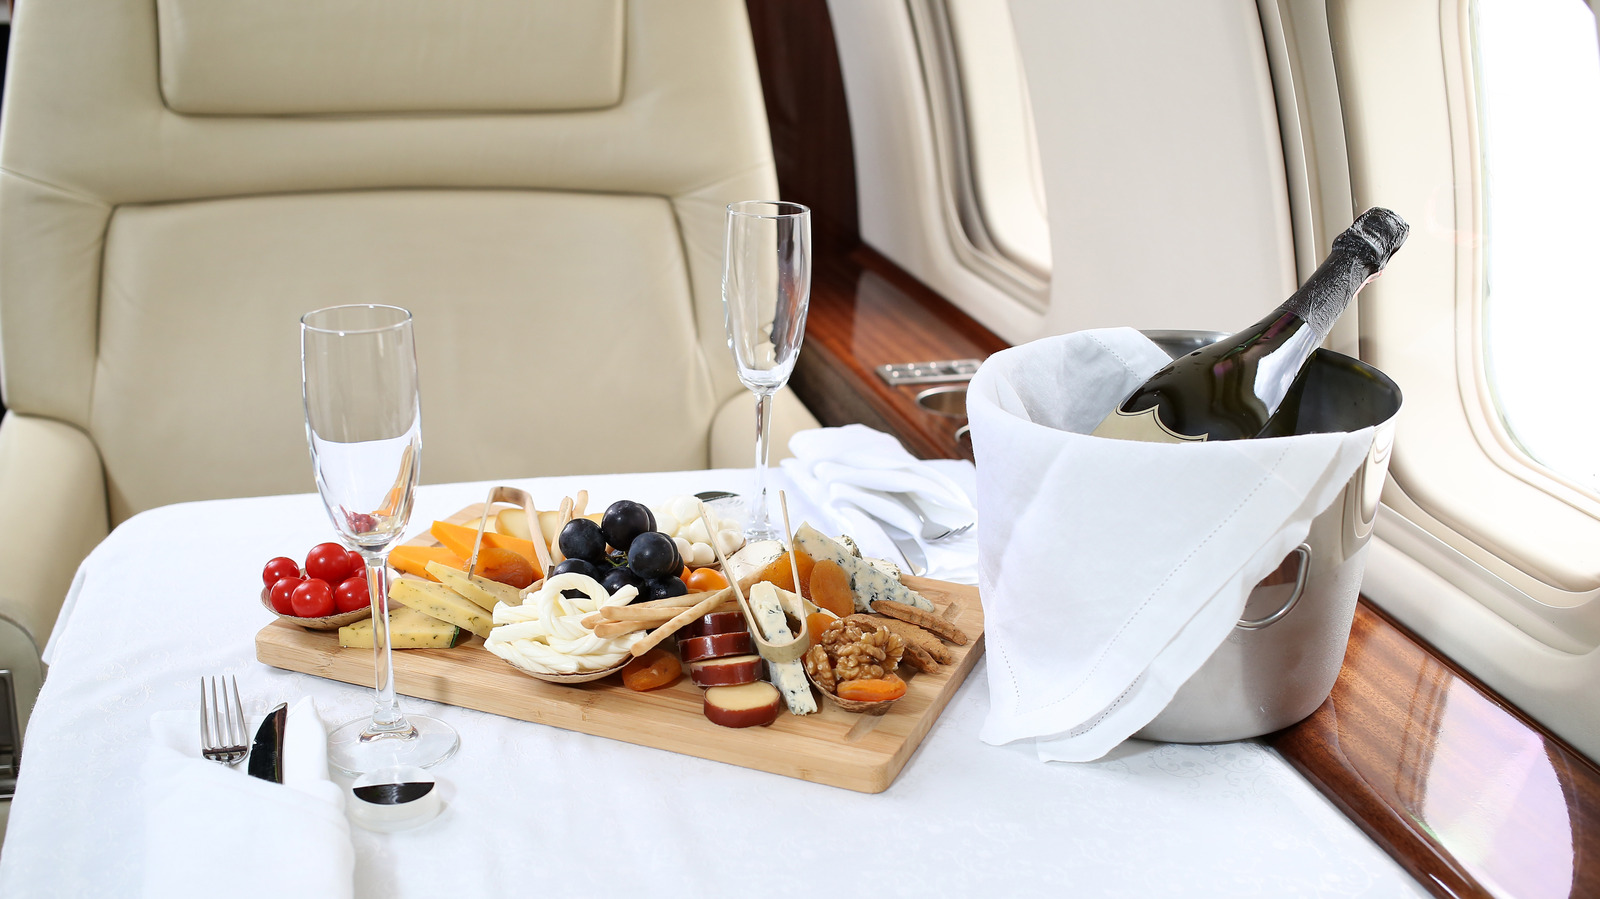 https://www.tastingtable.com/img/gallery/15-airlines-with-the-absolute-best-quality-meals-ranked/l-intro-1678141510.jpg